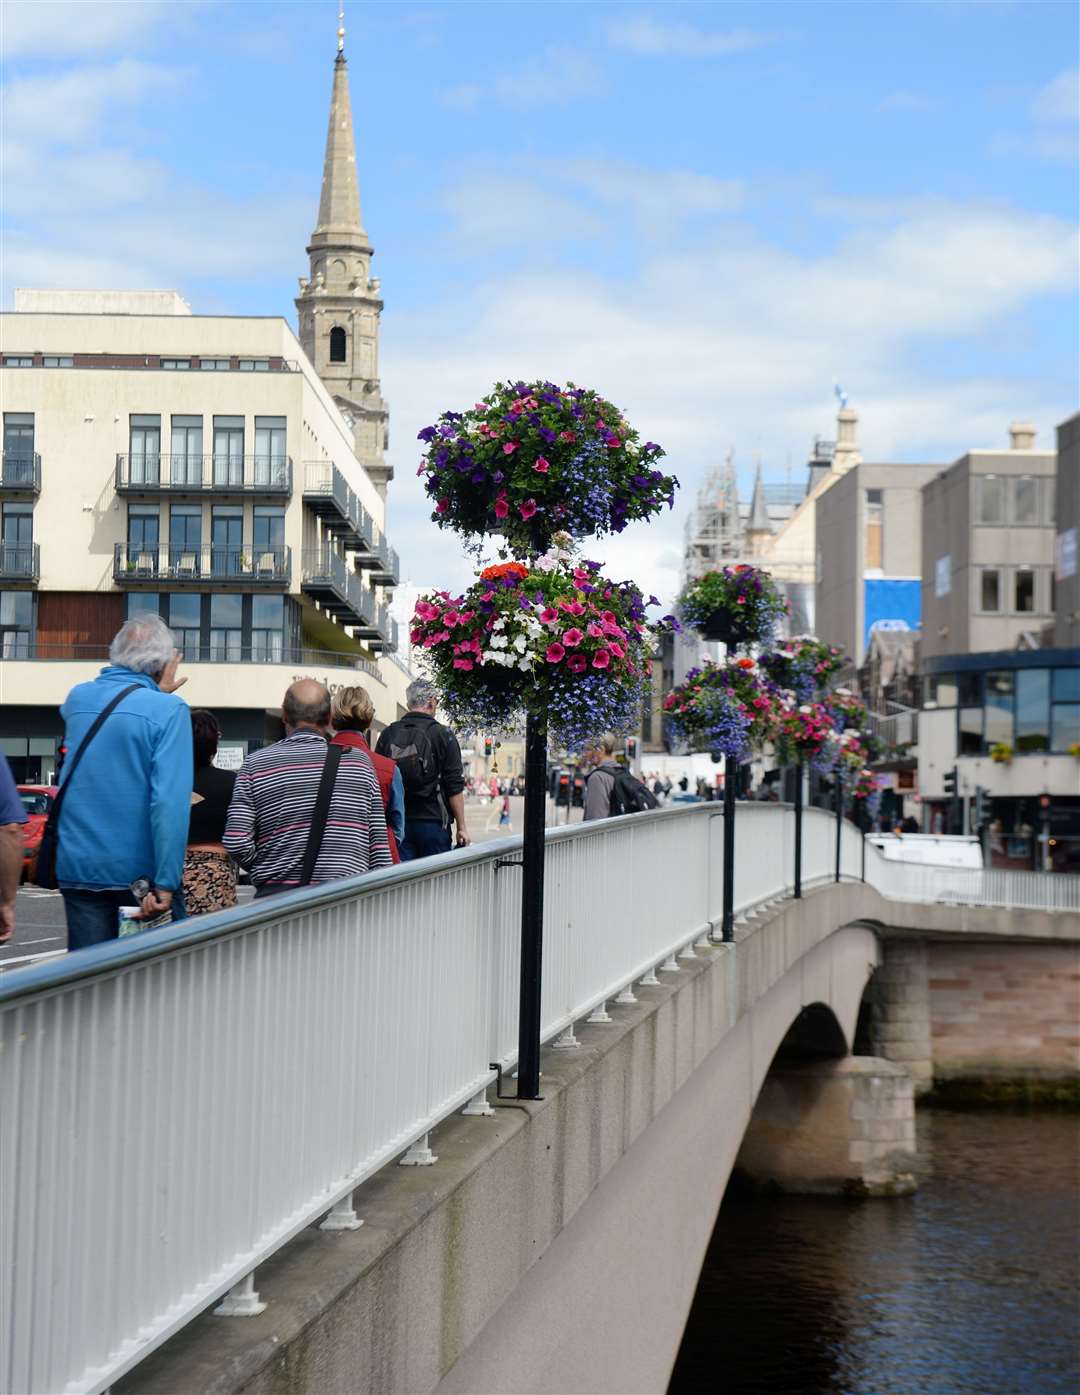 Floral displays on Ness Bridge in Inverness.